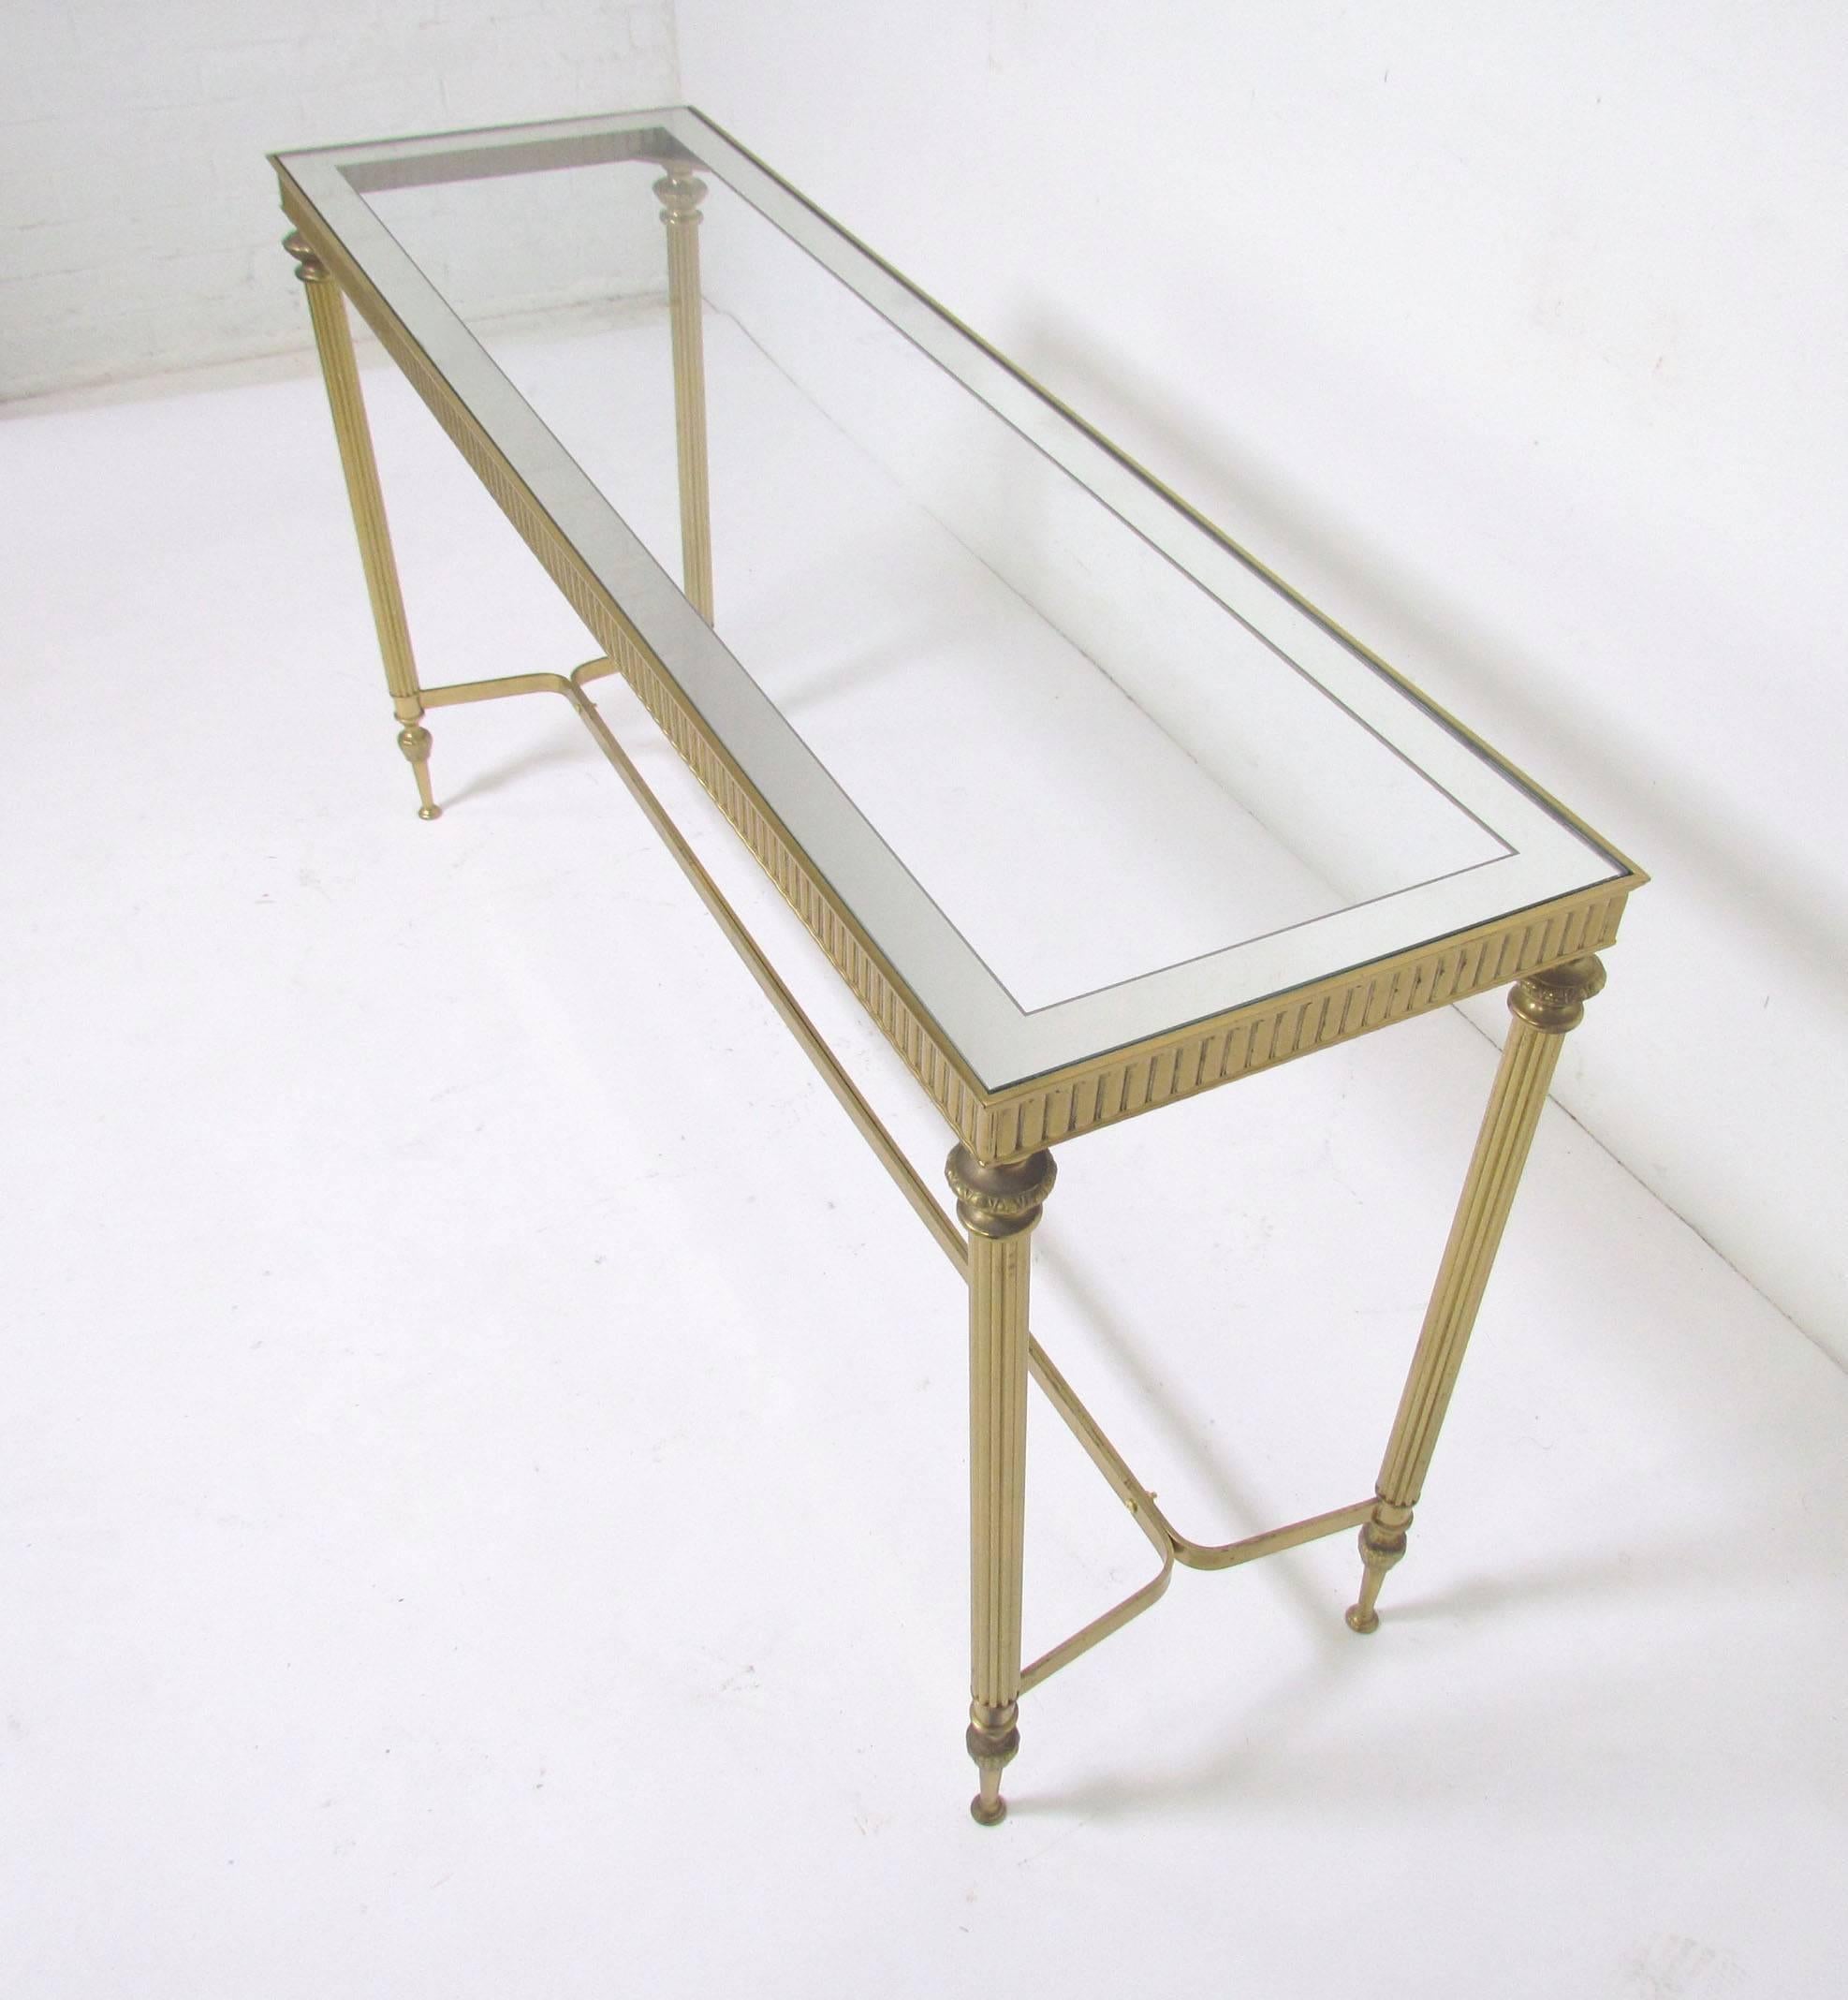 Classic Hollywood Regency style brass console table with reeded leg detail, circa 1960s. Glass top features mirrored edge banding. Most likely Italian.